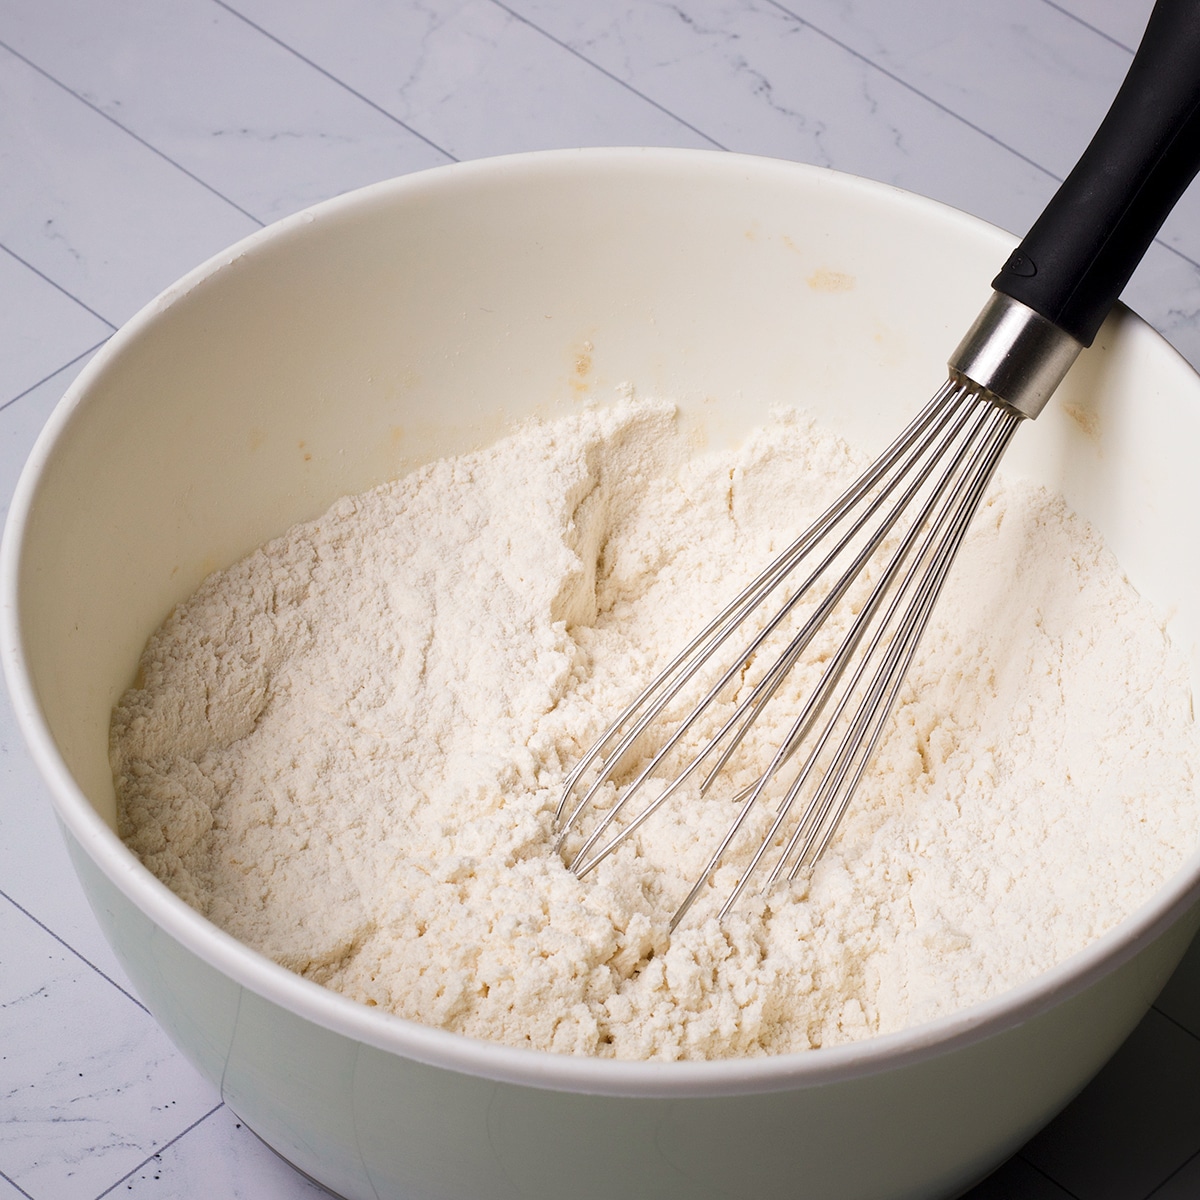 Using a wire whisk to stir flour, baking powder, baking soda, and salt in a white bowl.